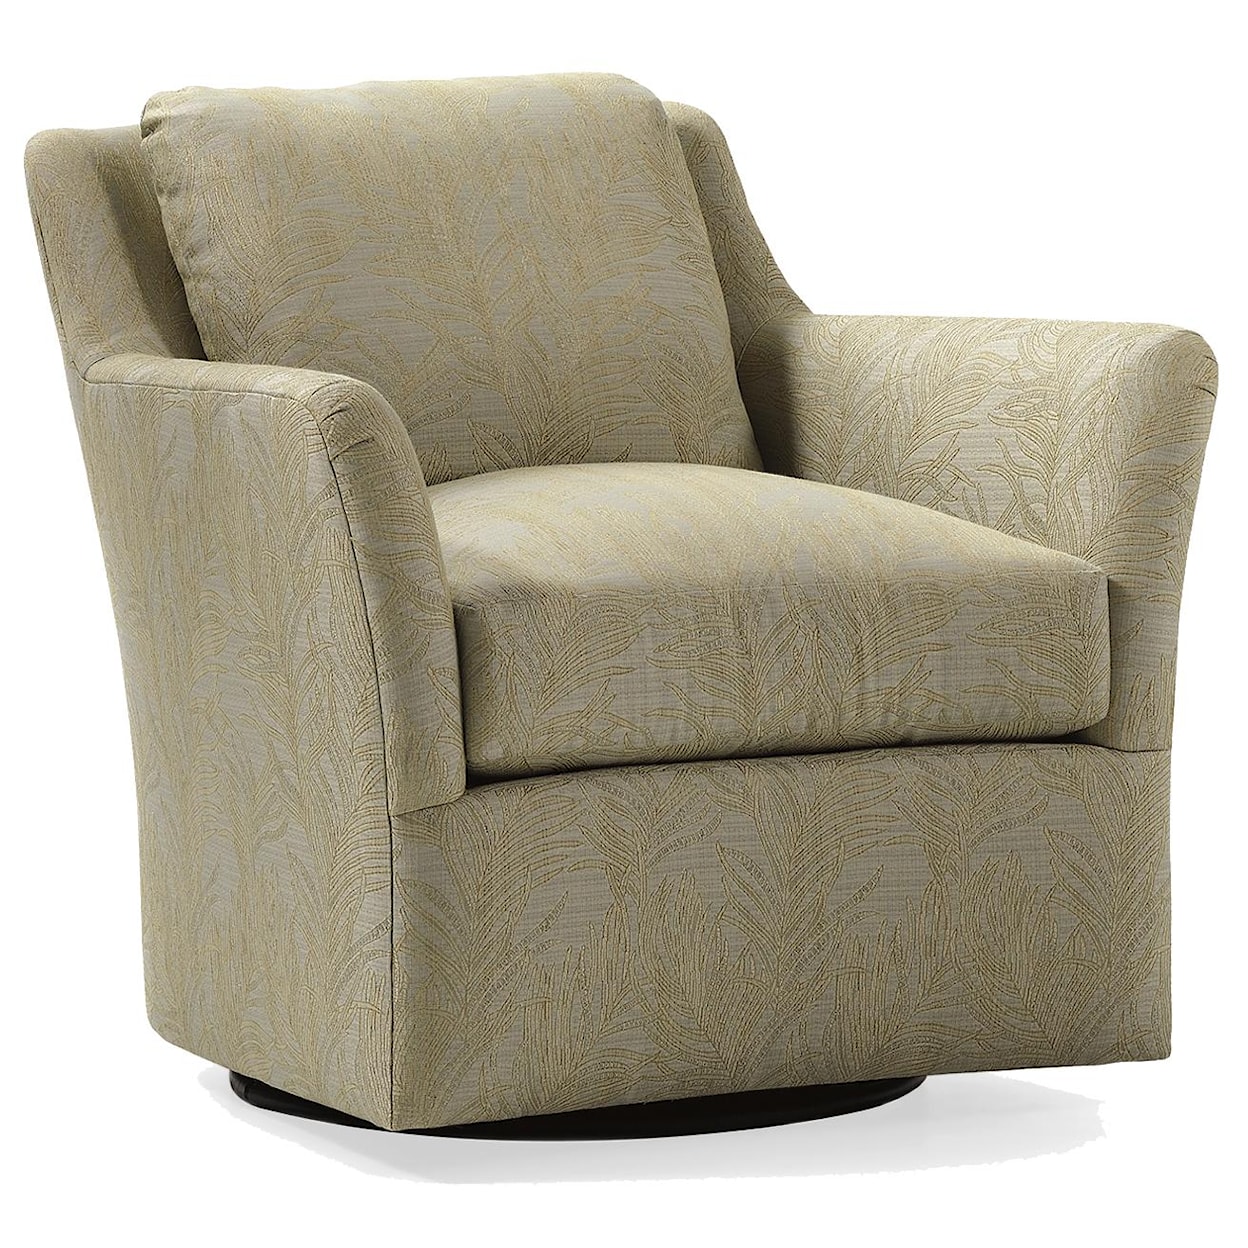 Jessica Charles Fine Upholstered Accents Addison Swivel Chair   